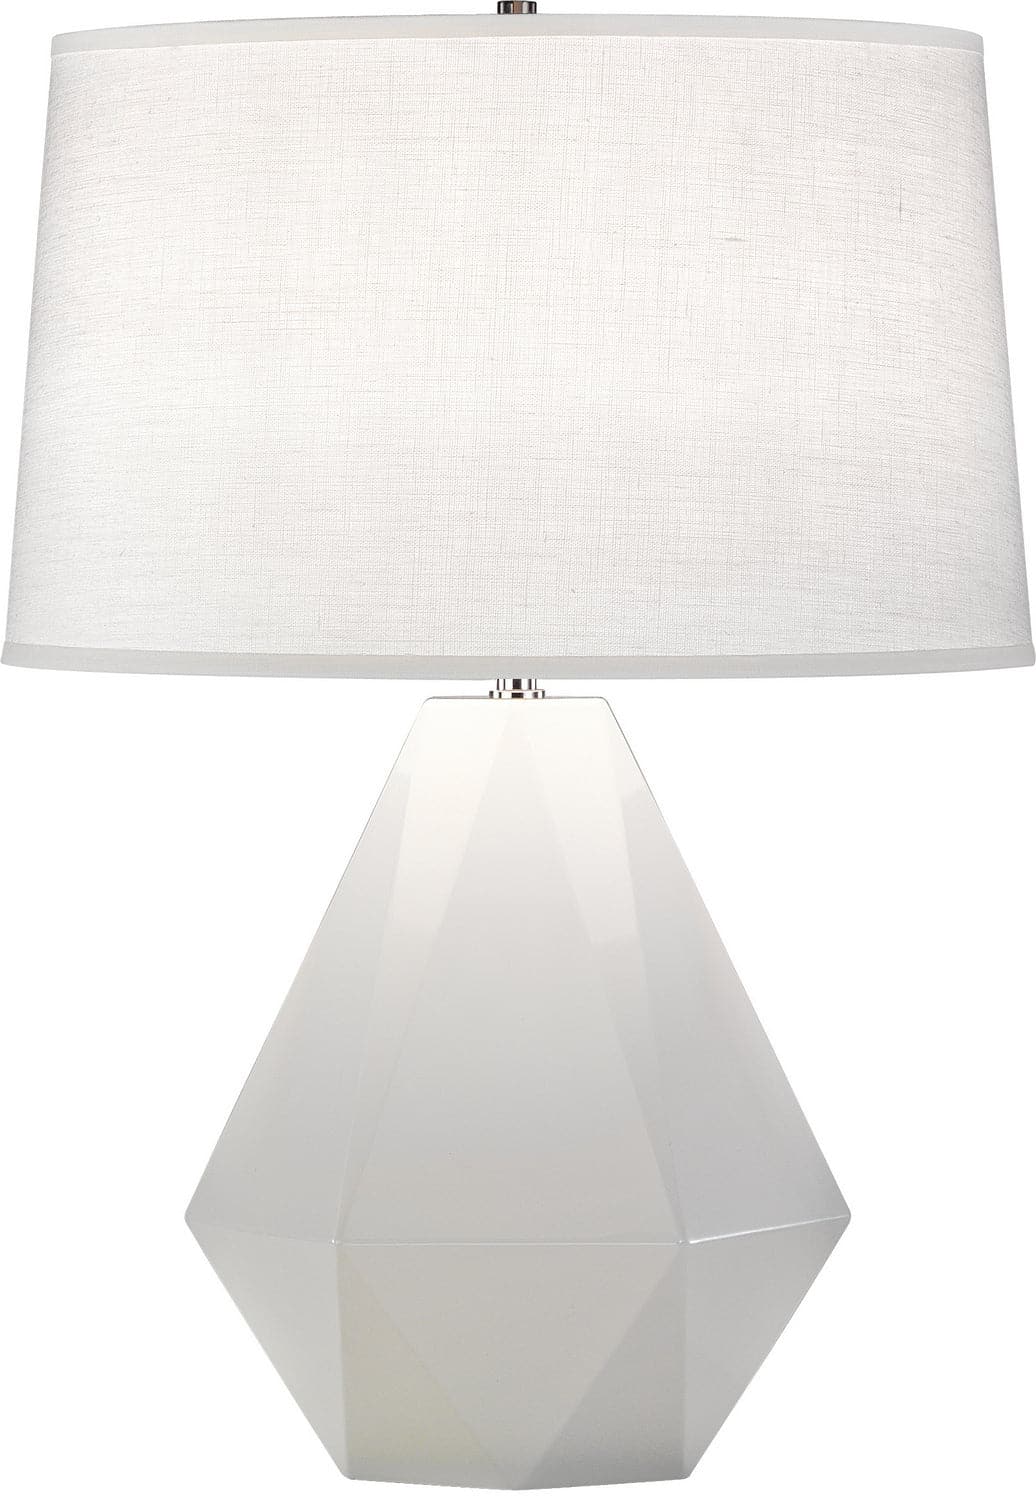 Robert Abbey - 932 - One Light Table Lamp - Delta - Lily Glazed w/Polished Nickel